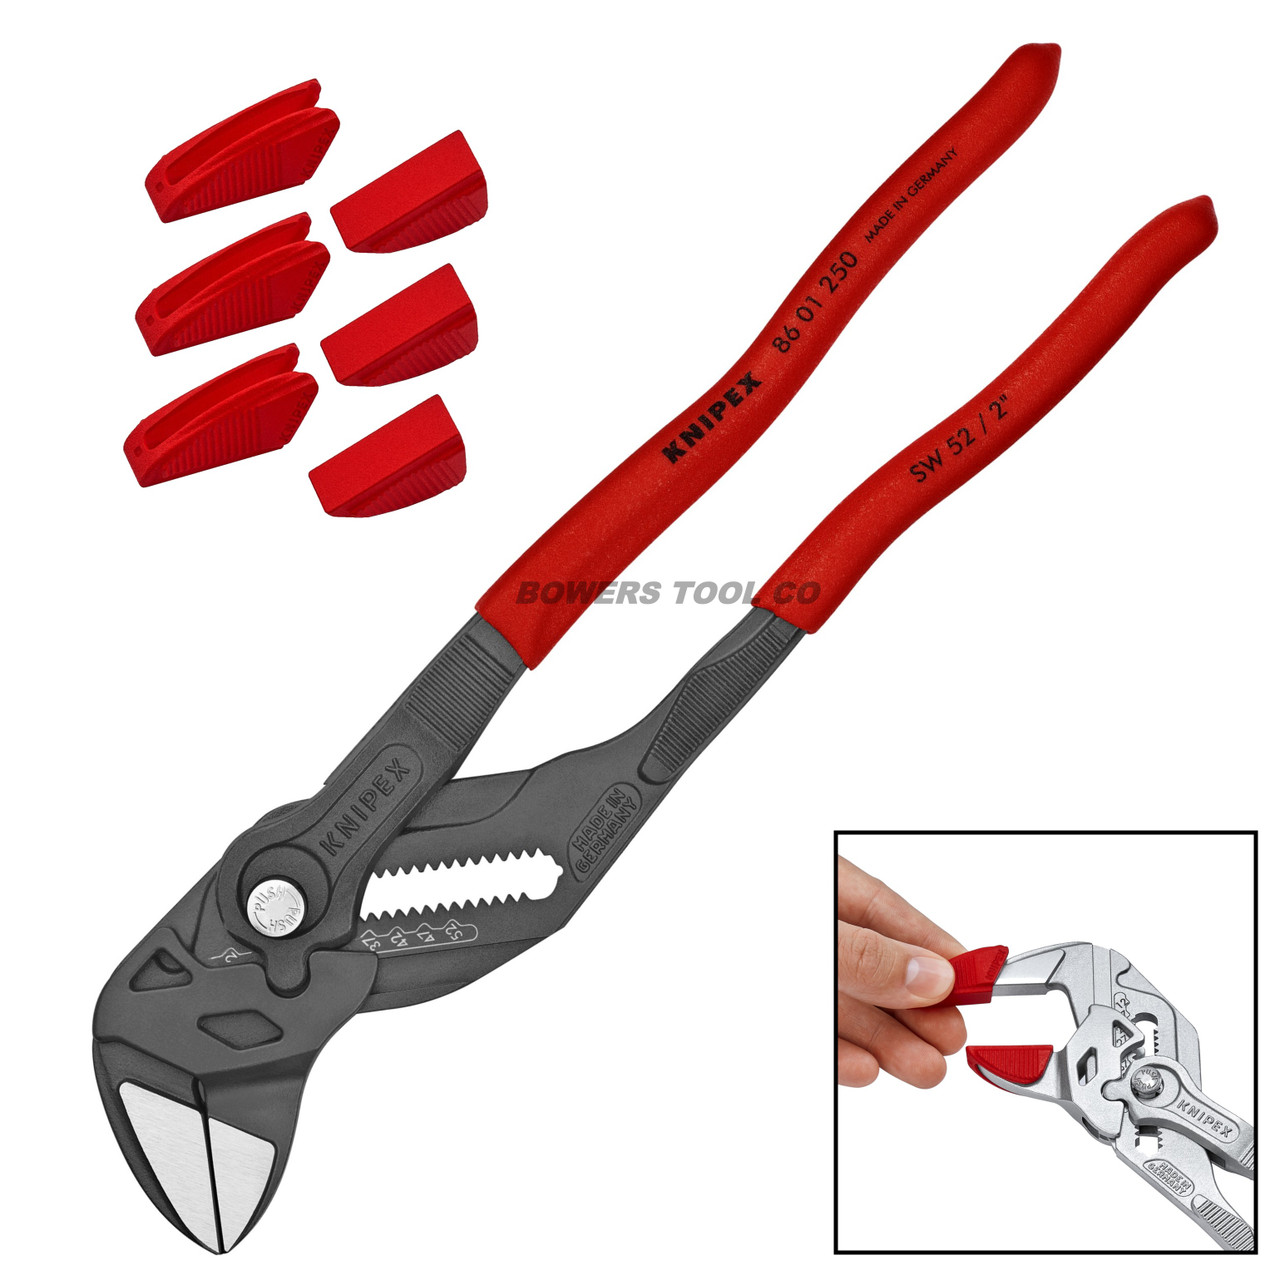 Knipex 10 Pliers Wrench 8601250 Adjustable Hybrid Wrench with Jaw